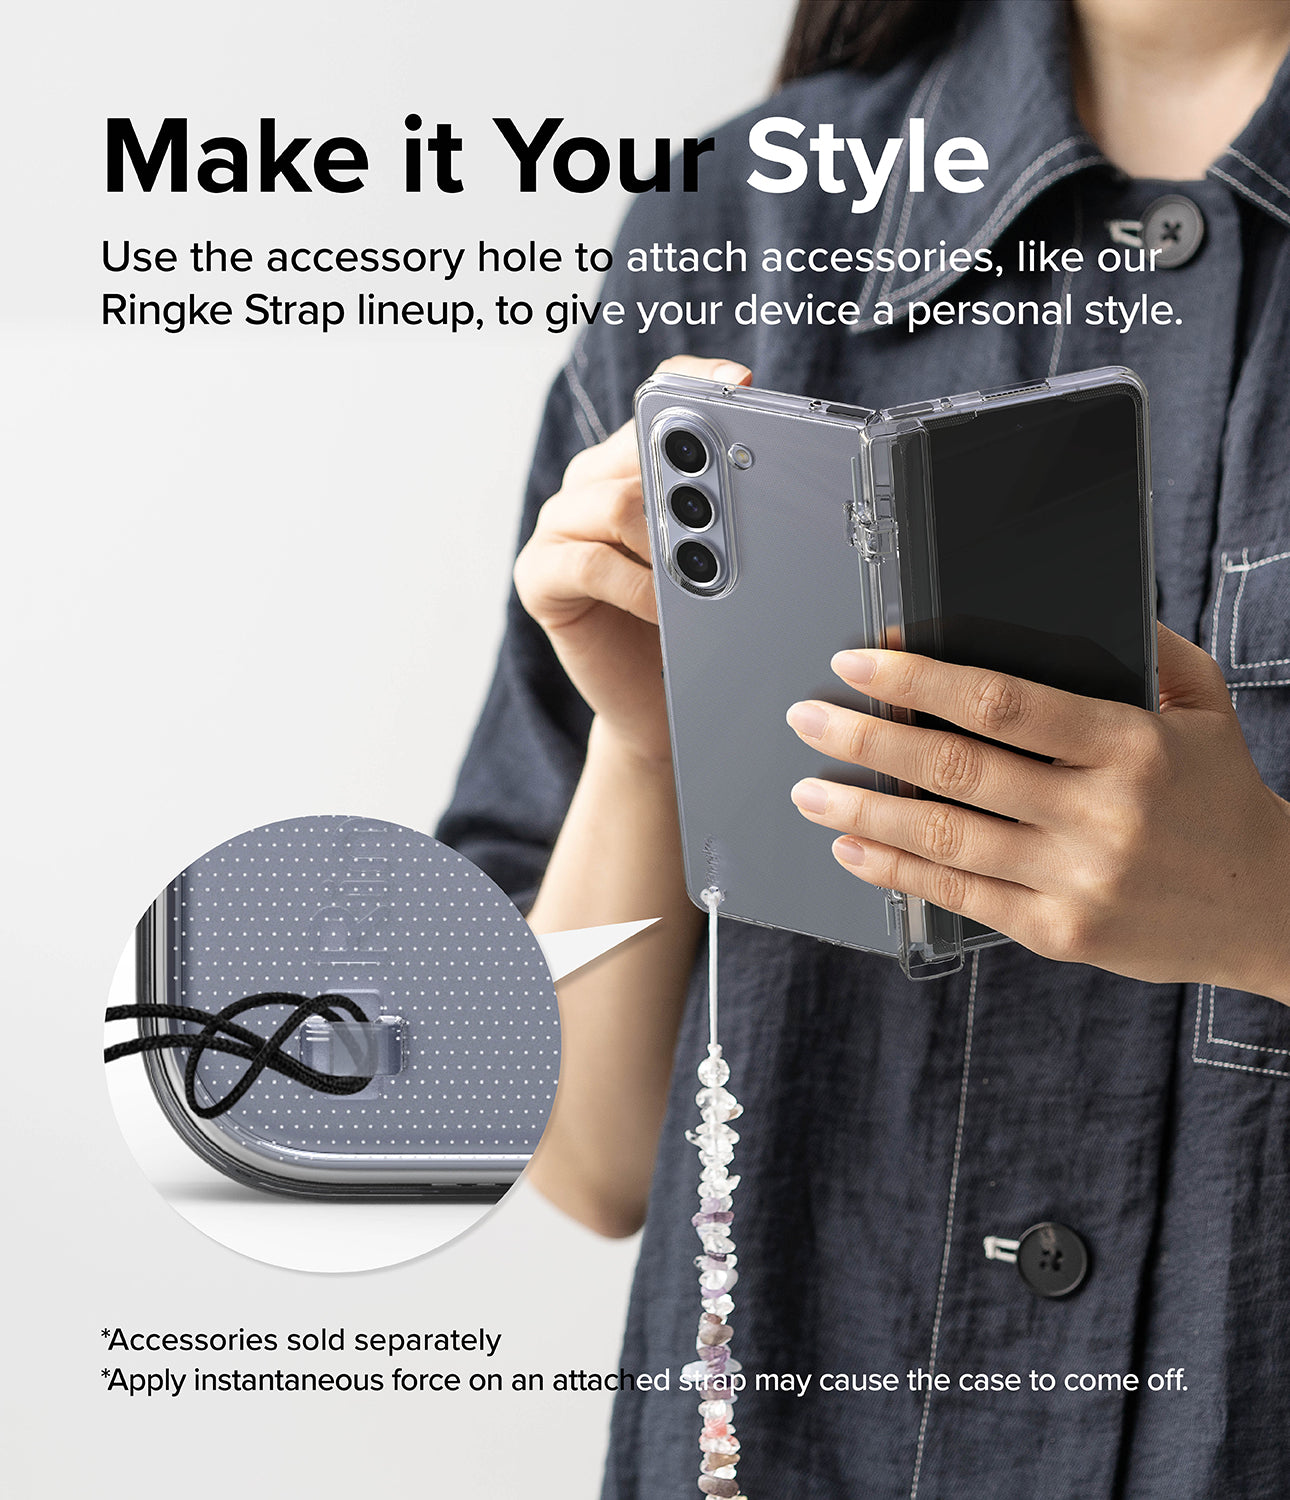 Galaxy Z Fold 5 Case | Slim Hinge - Make it Your Style. Use the accessory hole to attach accessories, like our Ringke Strap lineup, to give your device a personal style.